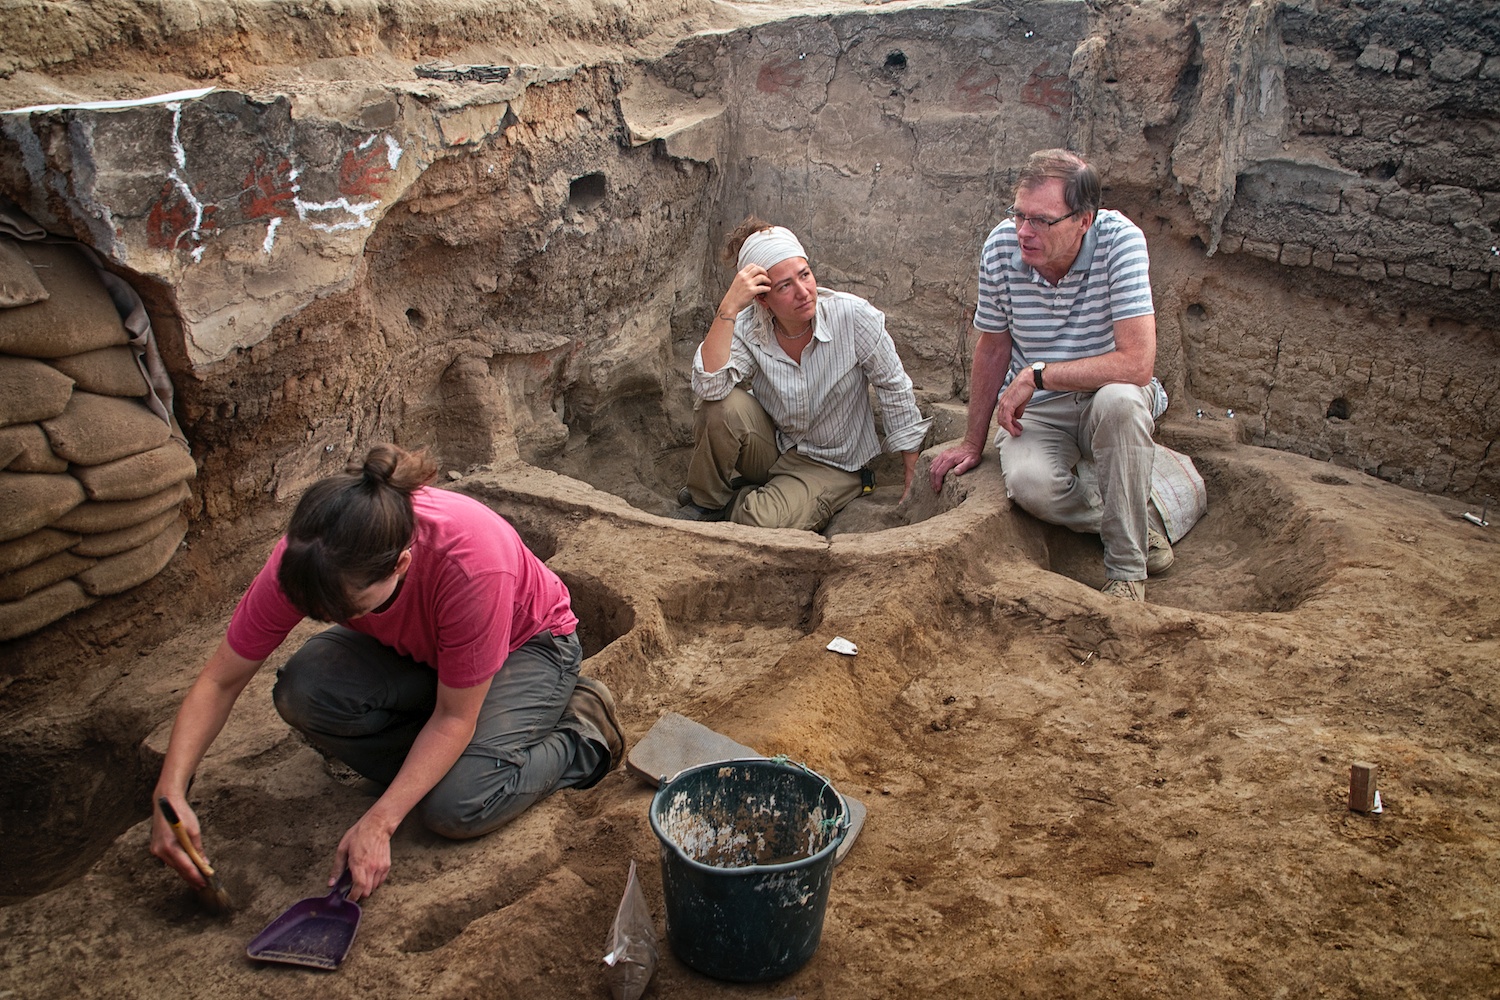  Burcu Tung and Ian Hodder discuss excavation plans in Building 77 (North Area) during the last days of the 2013 season. In the foreground, Renata Araujo cleans her area for a photo. 